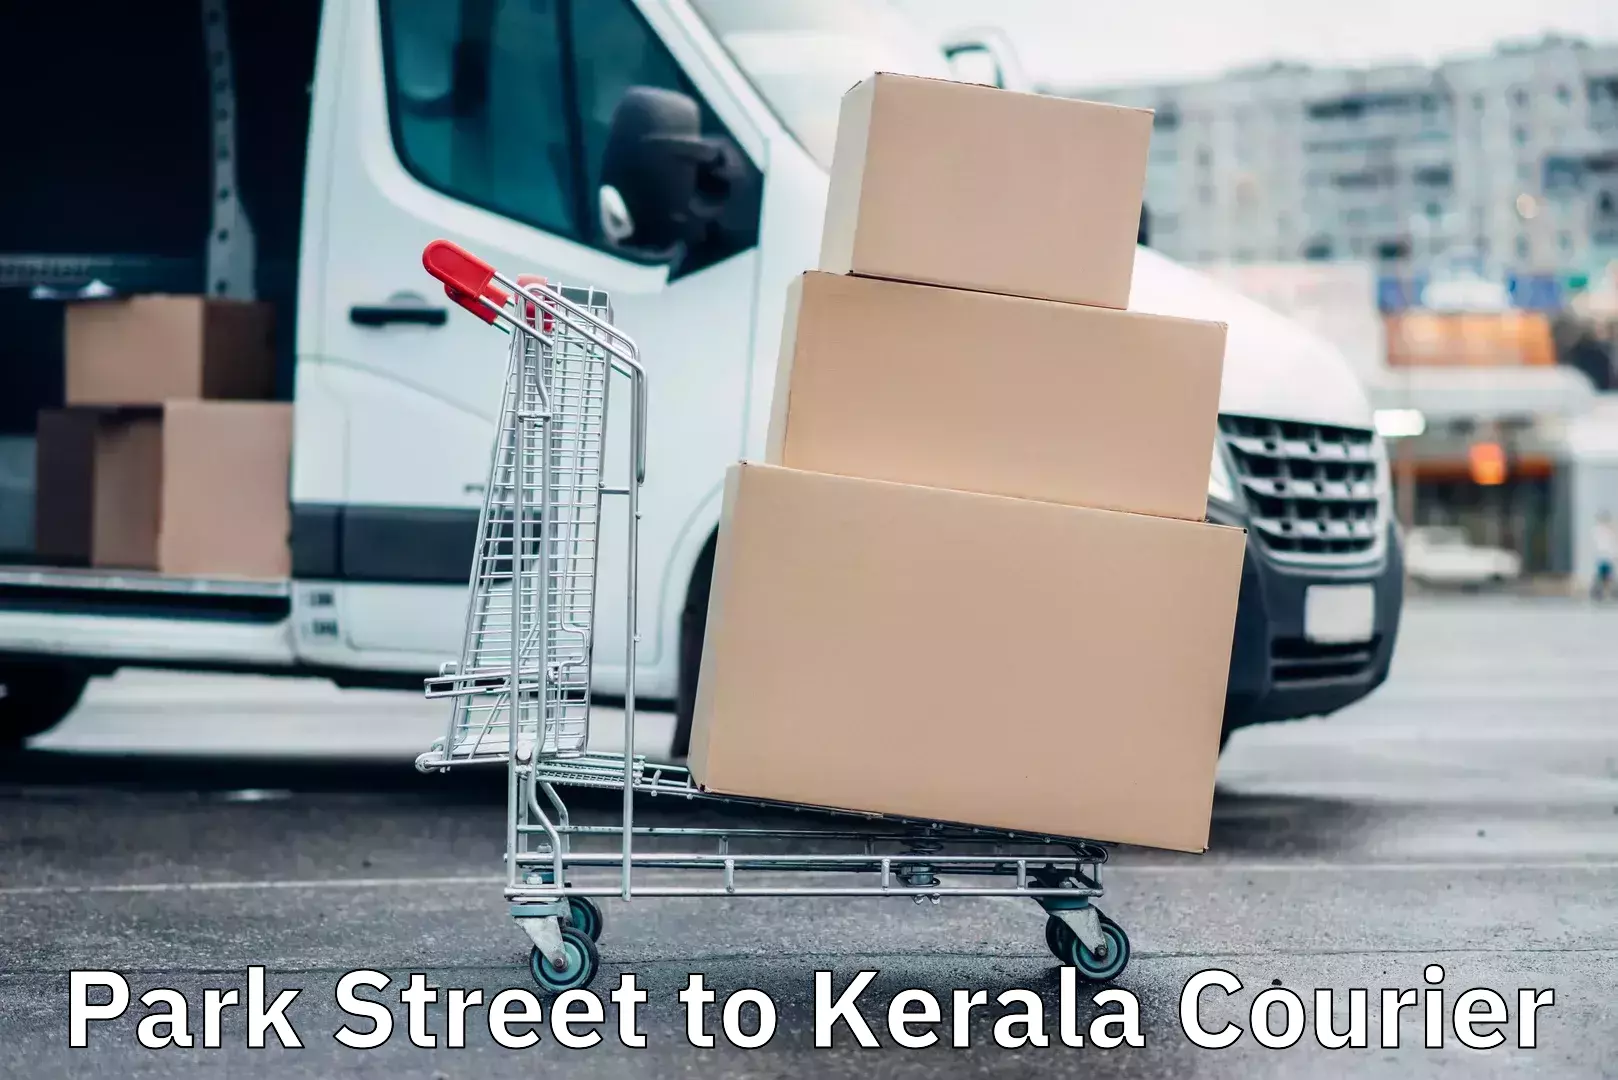 Nationwide courier service Park Street to Kerala